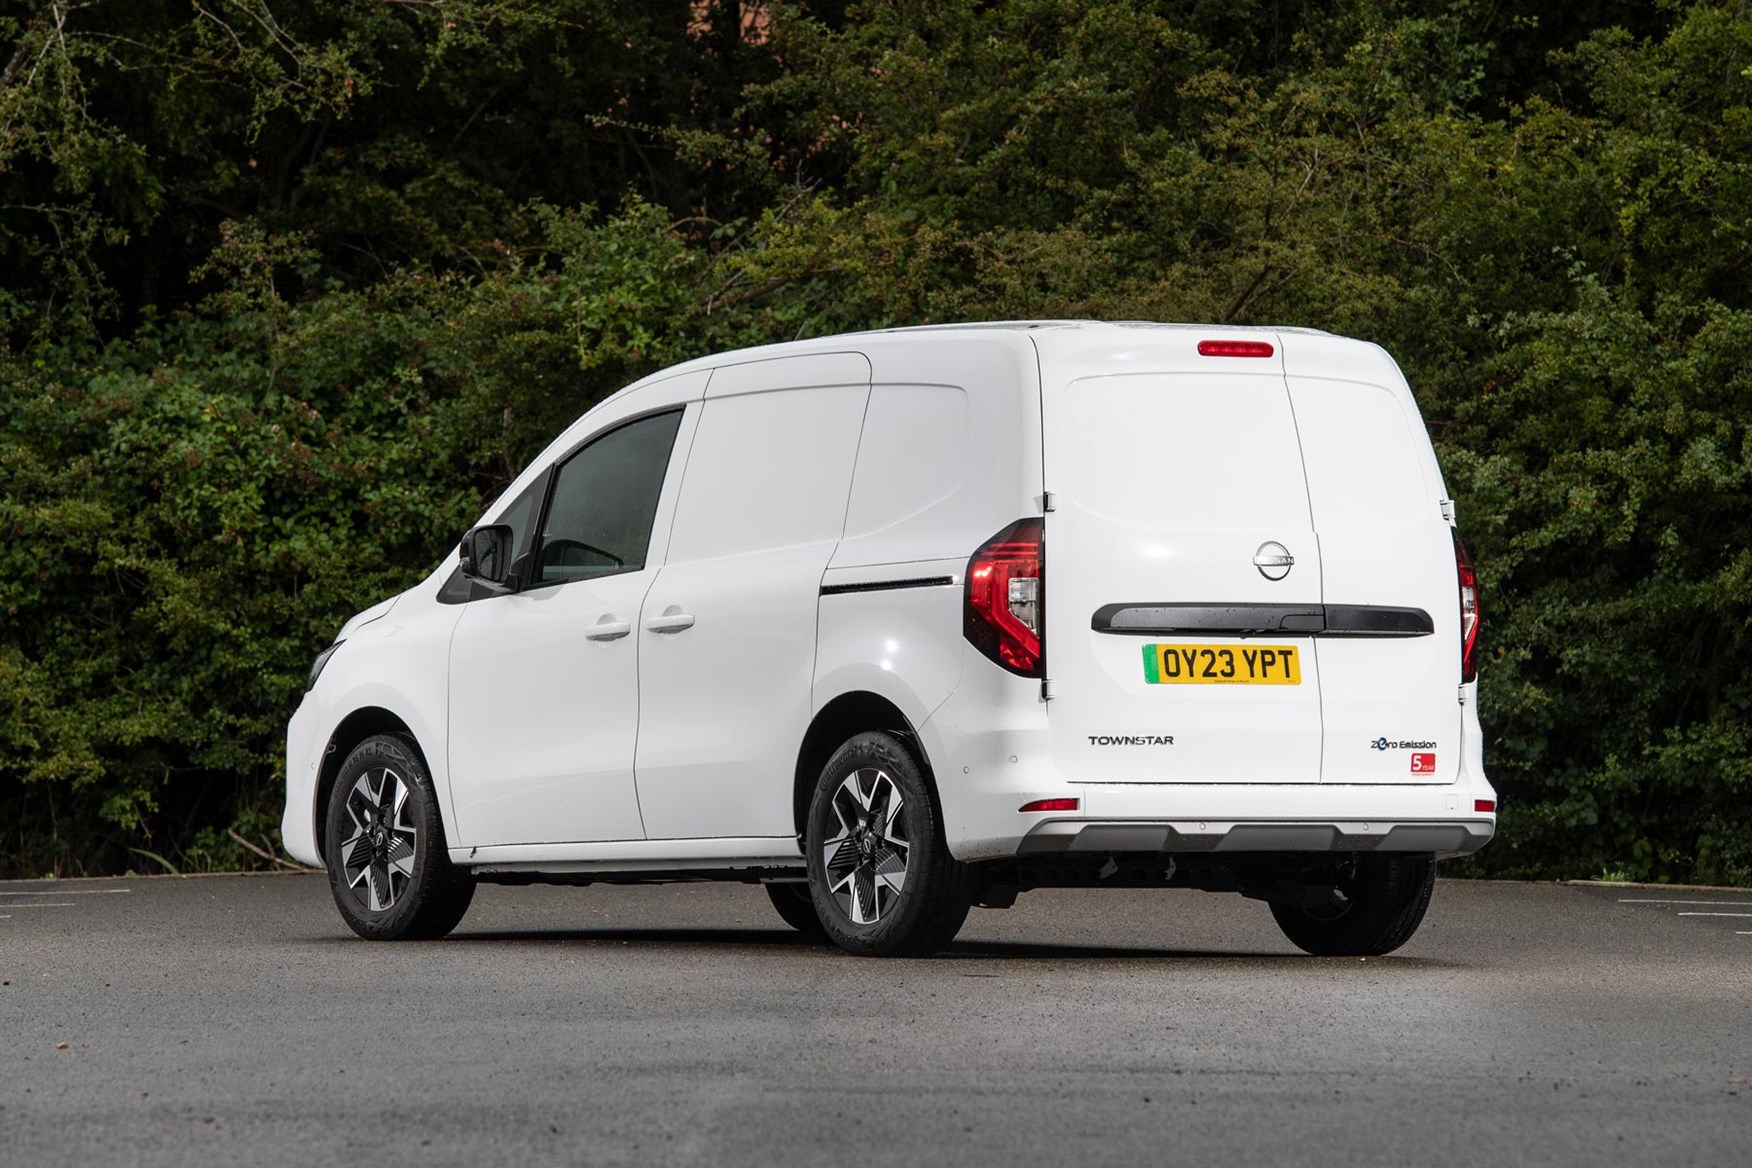 Nissan Townstar is available with petrol and electric powertrains. 